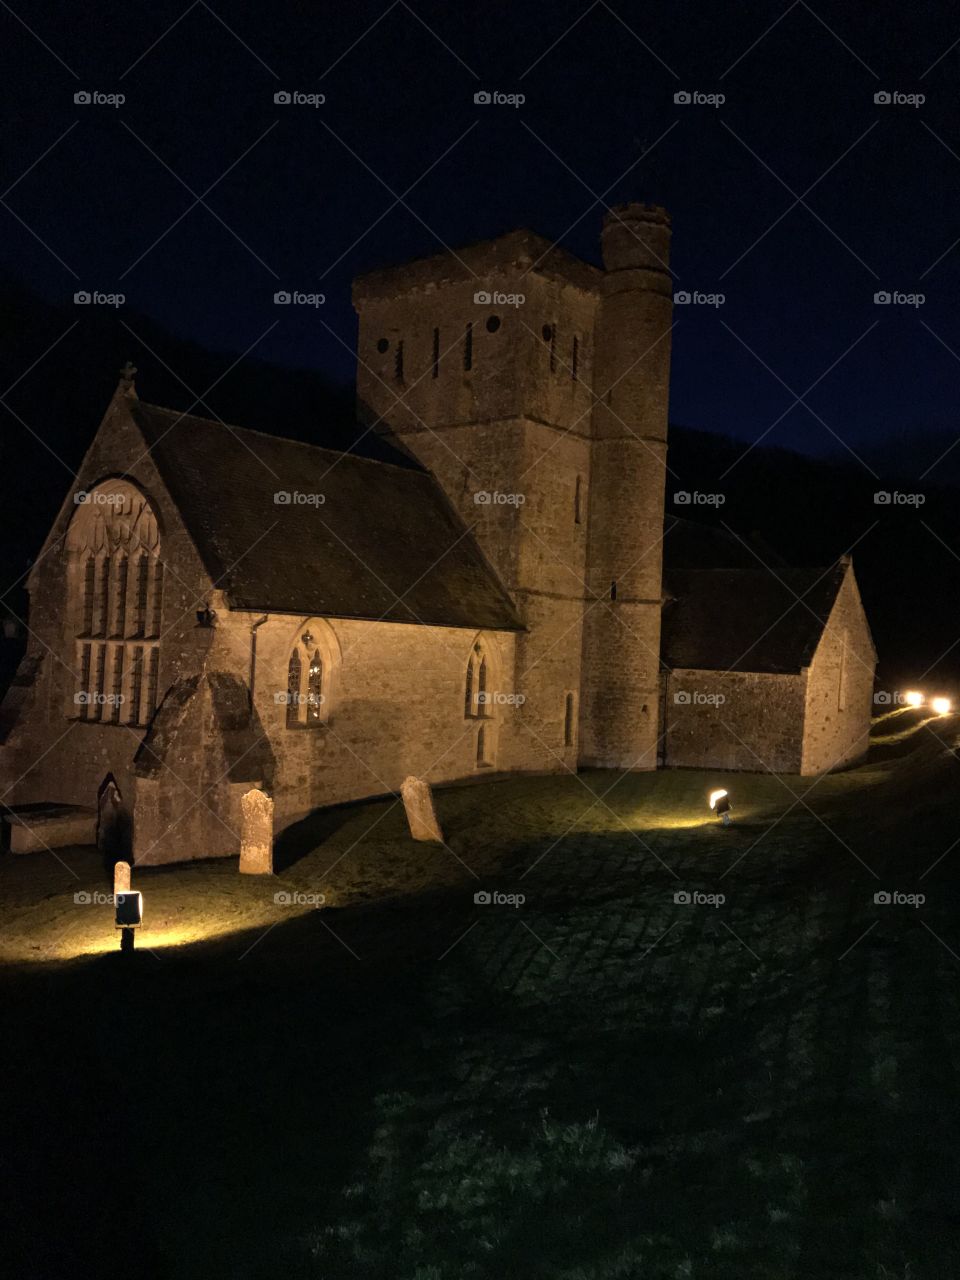 Branscombe Church looking spectacular in its environment at night.